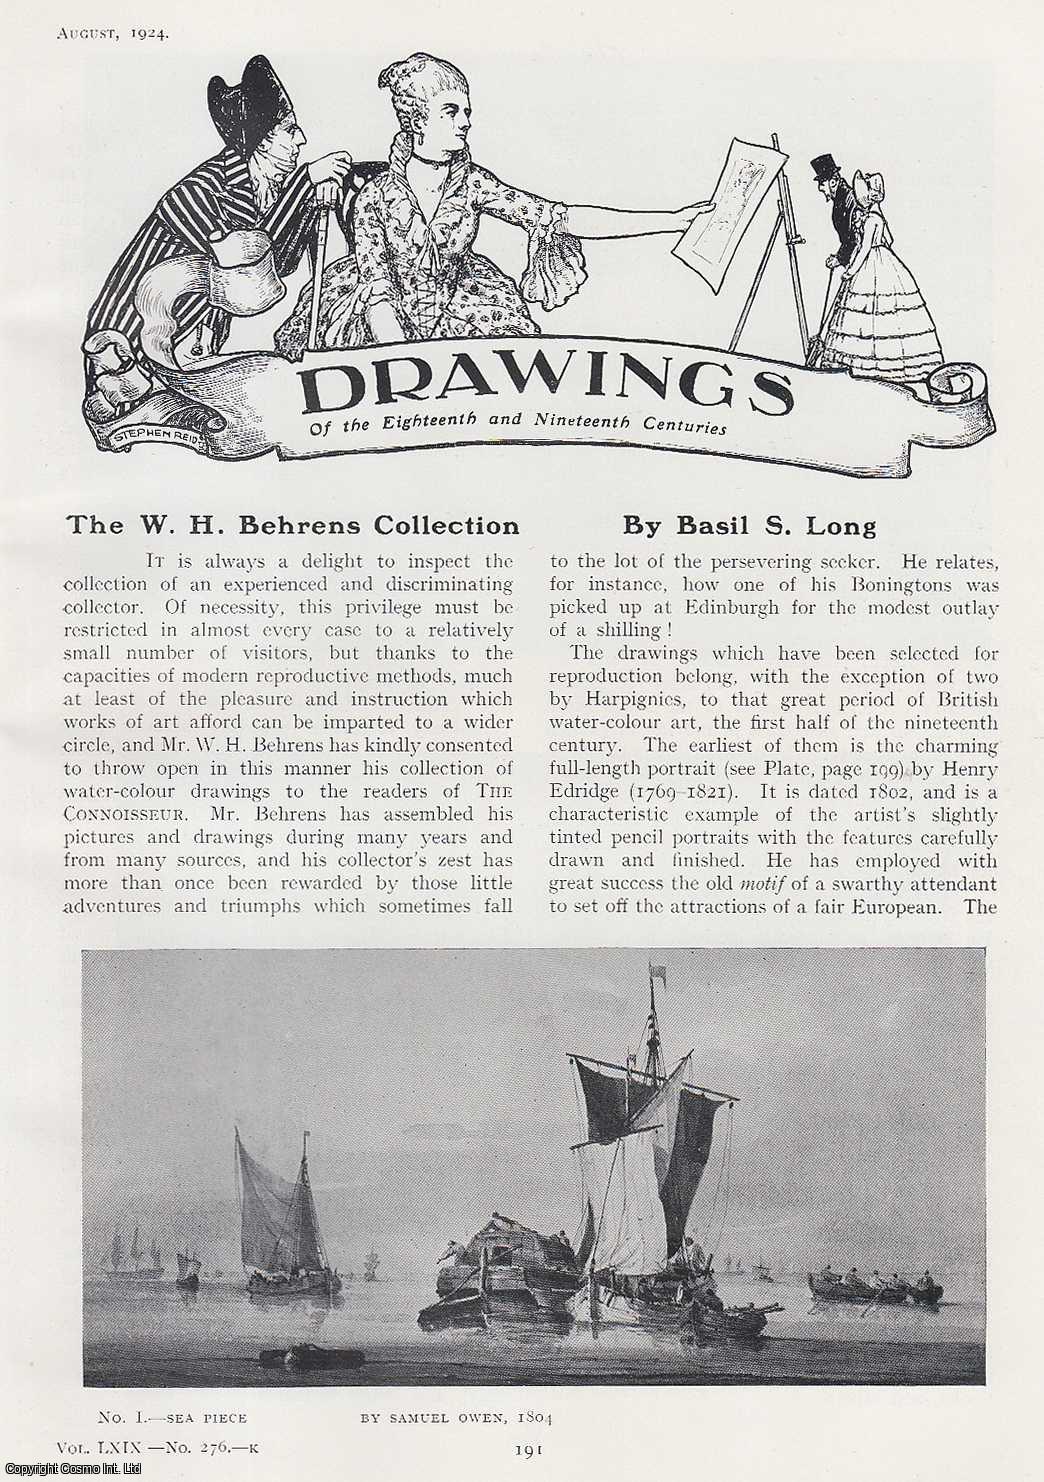 Basil S. Long - The W.H. Behrens Collection. An original article from The Connoisseur, 1924.